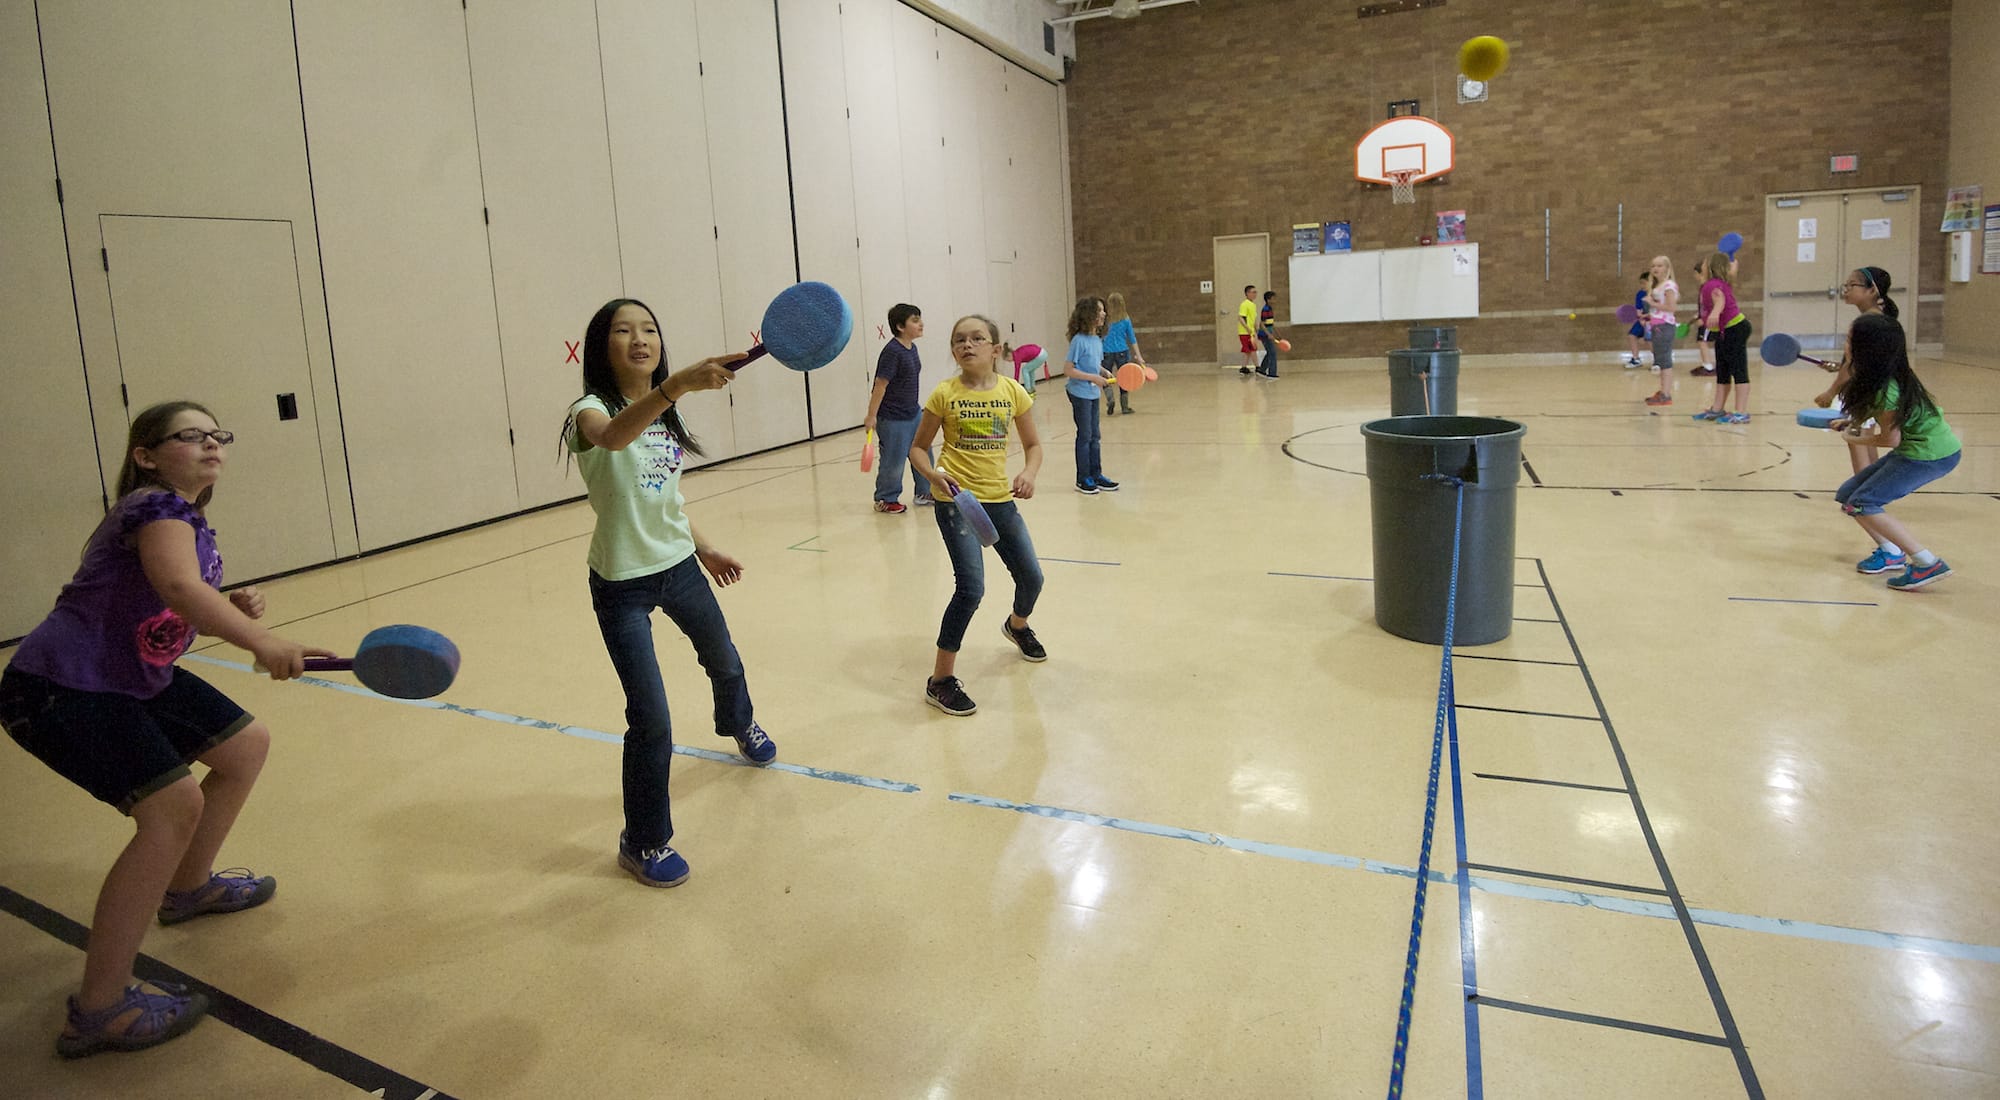 Fourth-graders at Illahee Elementary School play pickle ball in part of the school gym during physical education class.